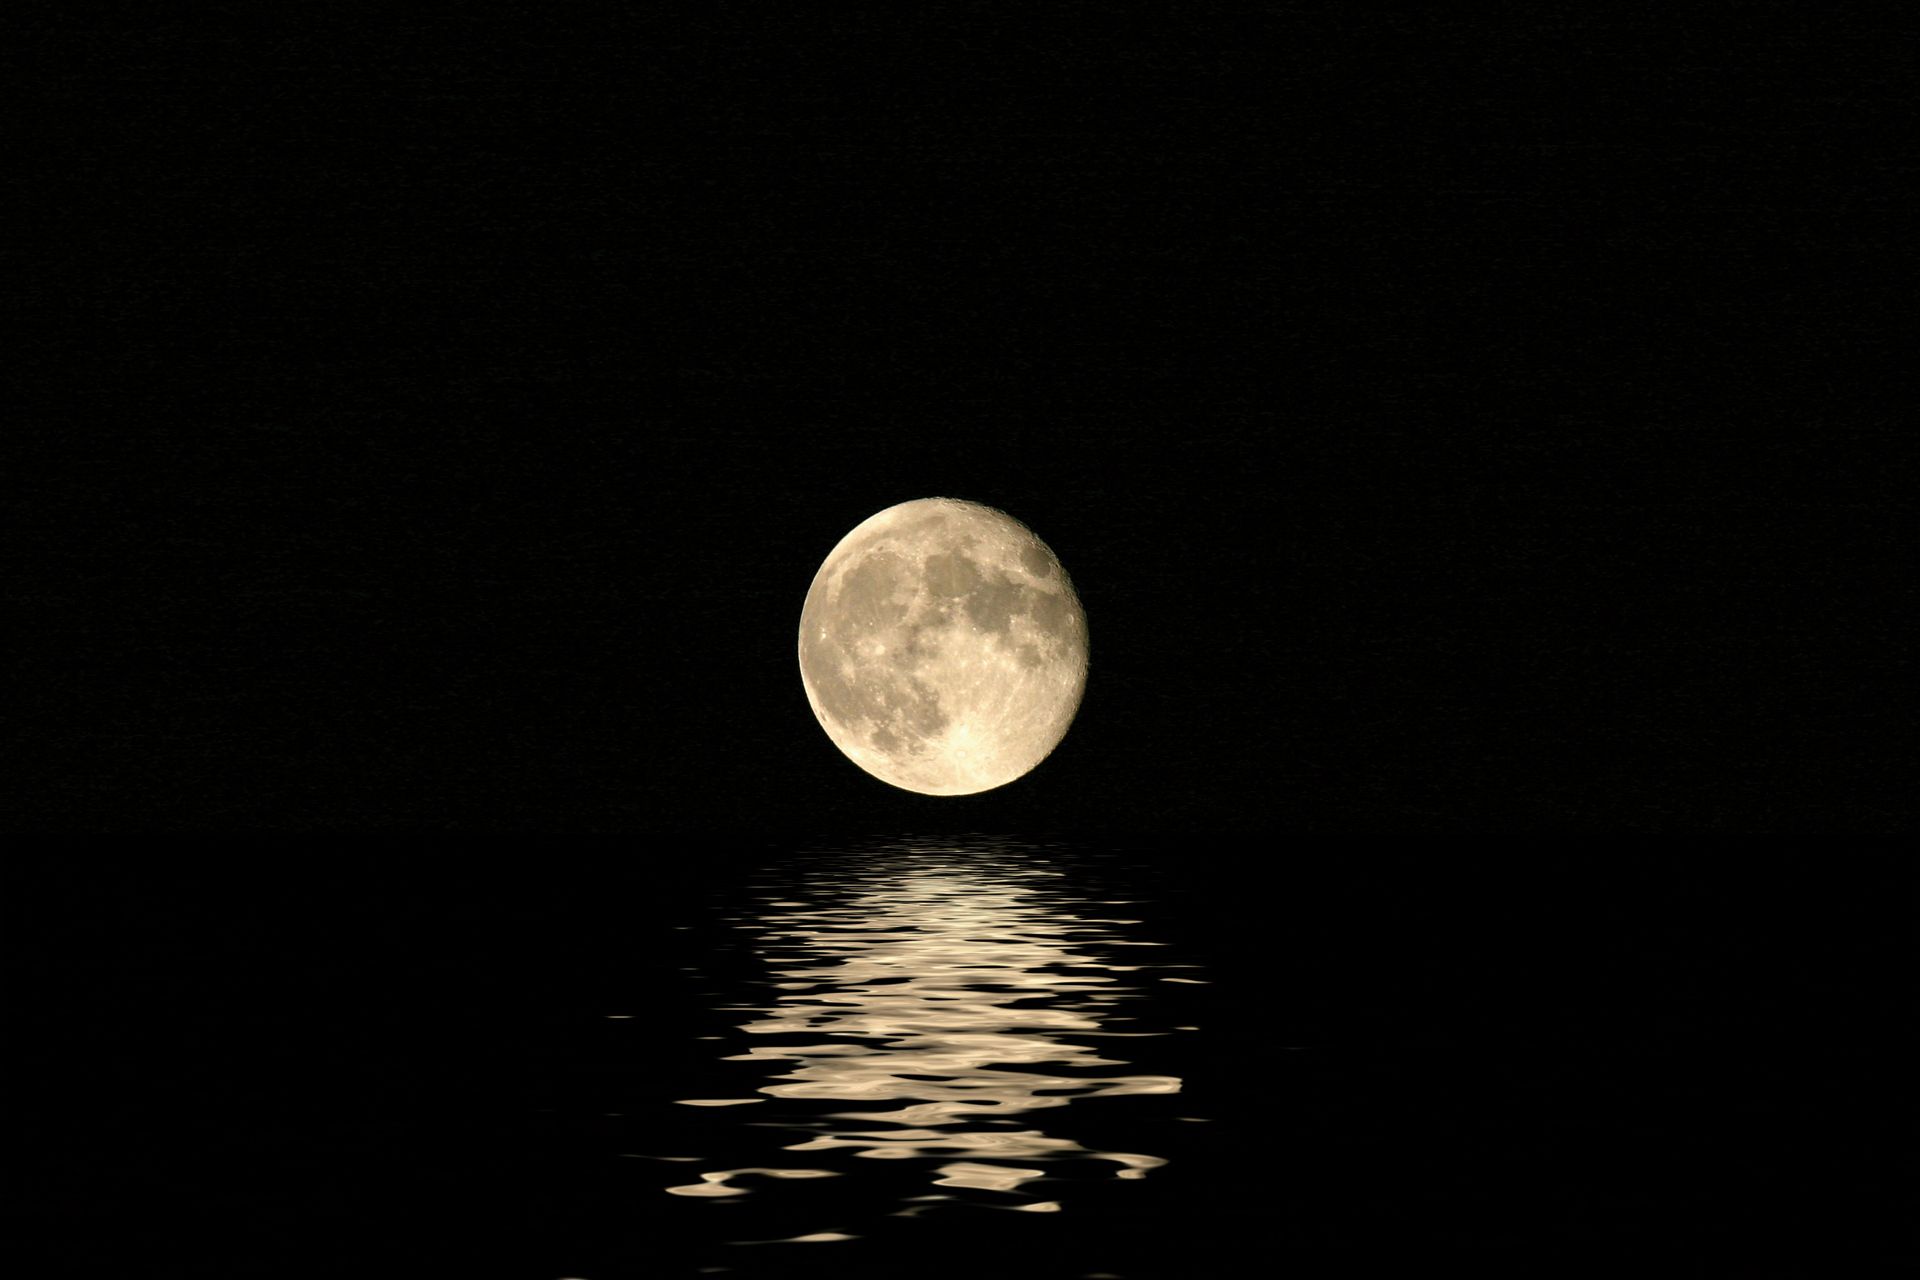 A full moon rises over the water.